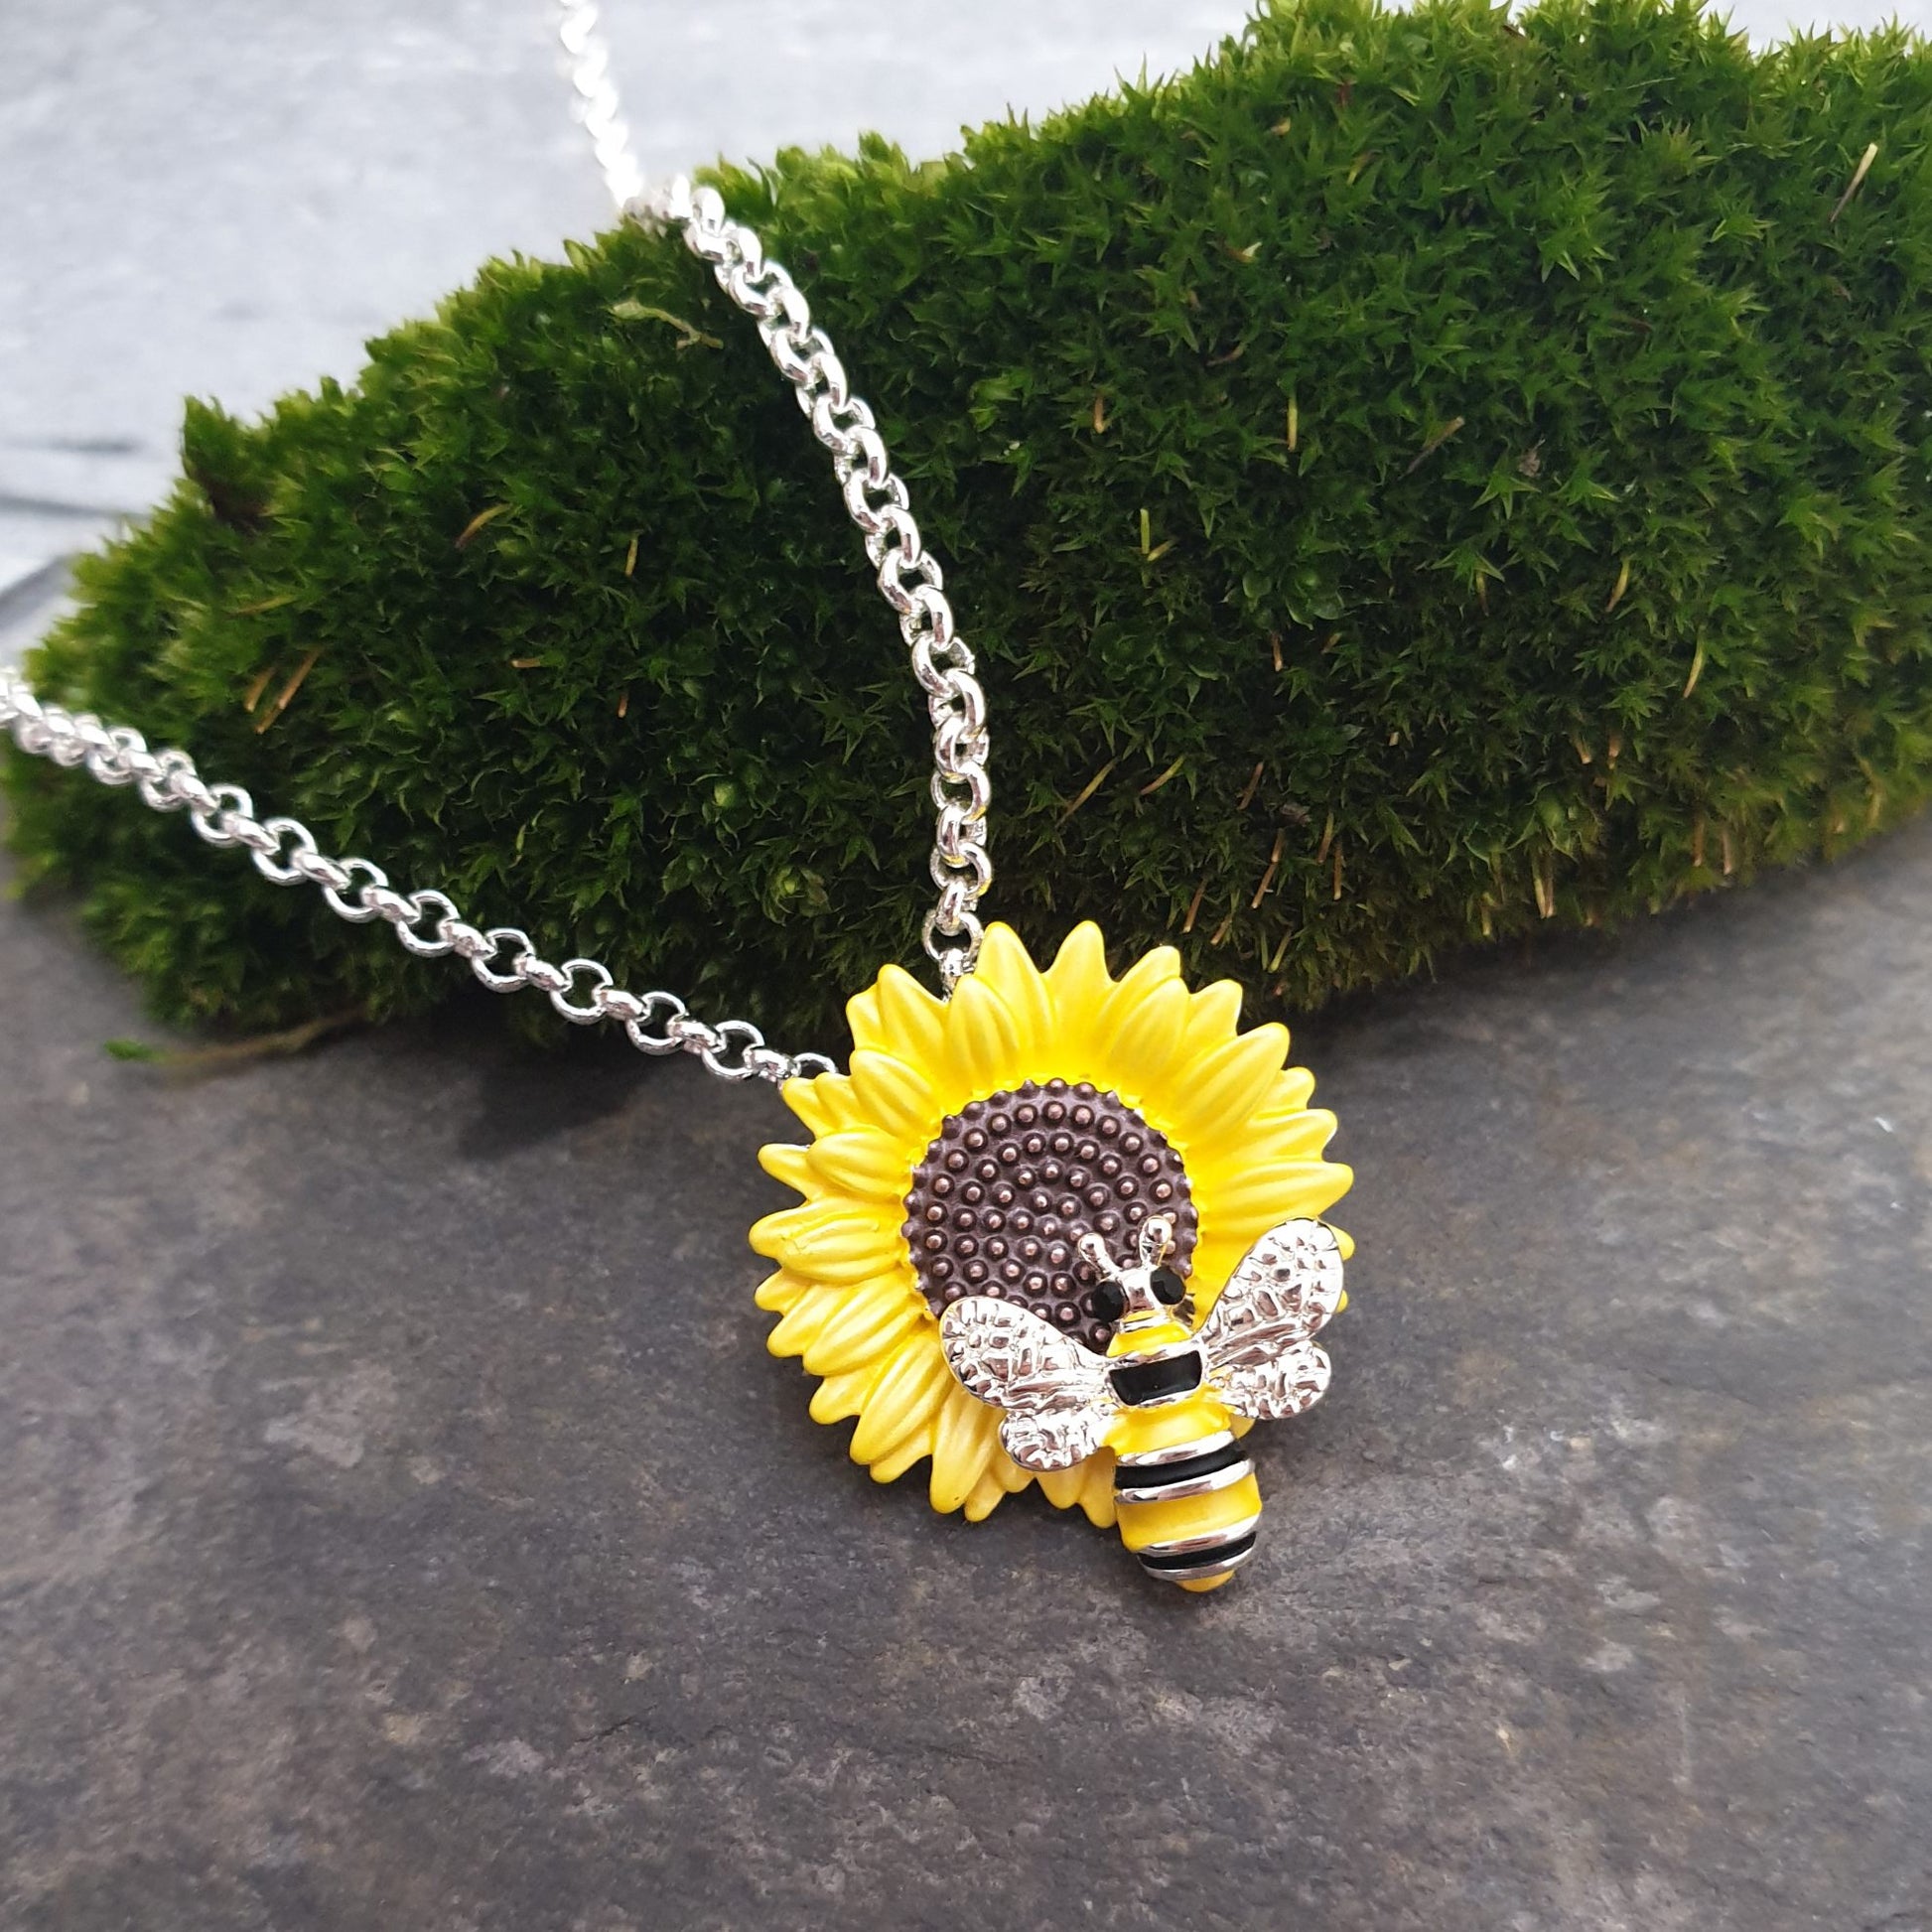 Bumble Bee on a Sunflower pendant necklace.